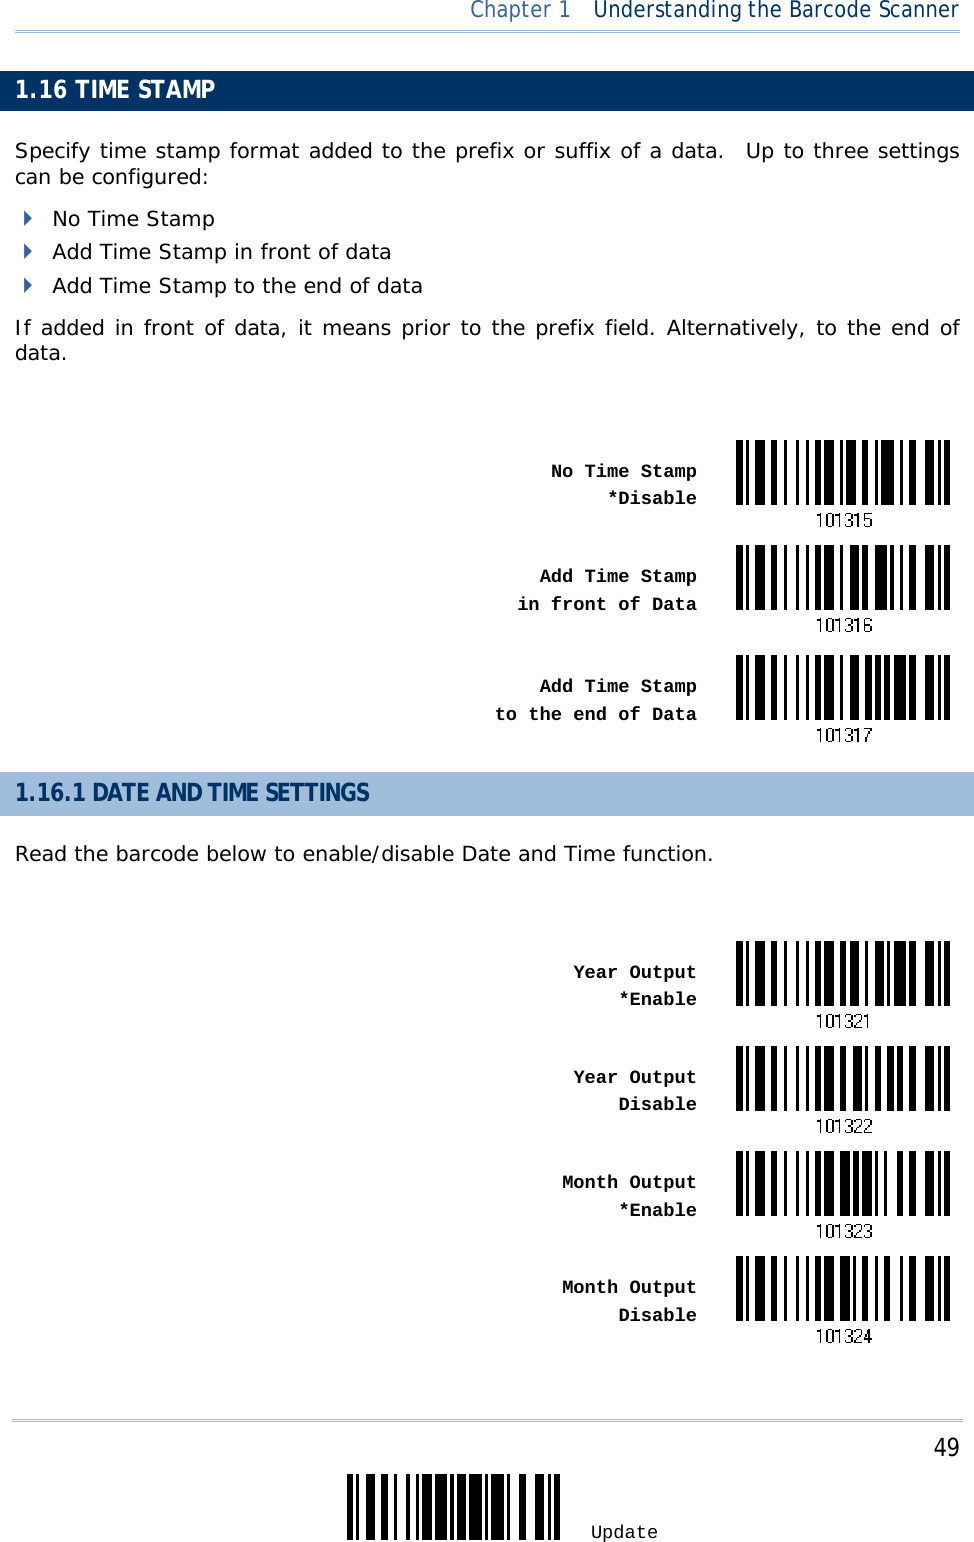     49 Update  Chapter 1  Understanding the Barcode Scanner 1.16 TIME STAMP    Specify time stamp format added to the prefix or suffix of a data.  Up to three settings can be configured:  No Time Stamp  Add Time Stamp in front of data  Add Time Stamp to the end of data If added in front of data, it means prior to the prefix field. Alternatively, to the end of data.   No Time Stamp*Disable Add Time Stamp in front of Data Add Time Stamp to the end of Data1.16.1 DATE AND TIME SETTINGS Read the barcode below to enable/disable Date and Time function.   Year Output*Enable Year OutputDisable Month Output*Enable Month OutputDisable 